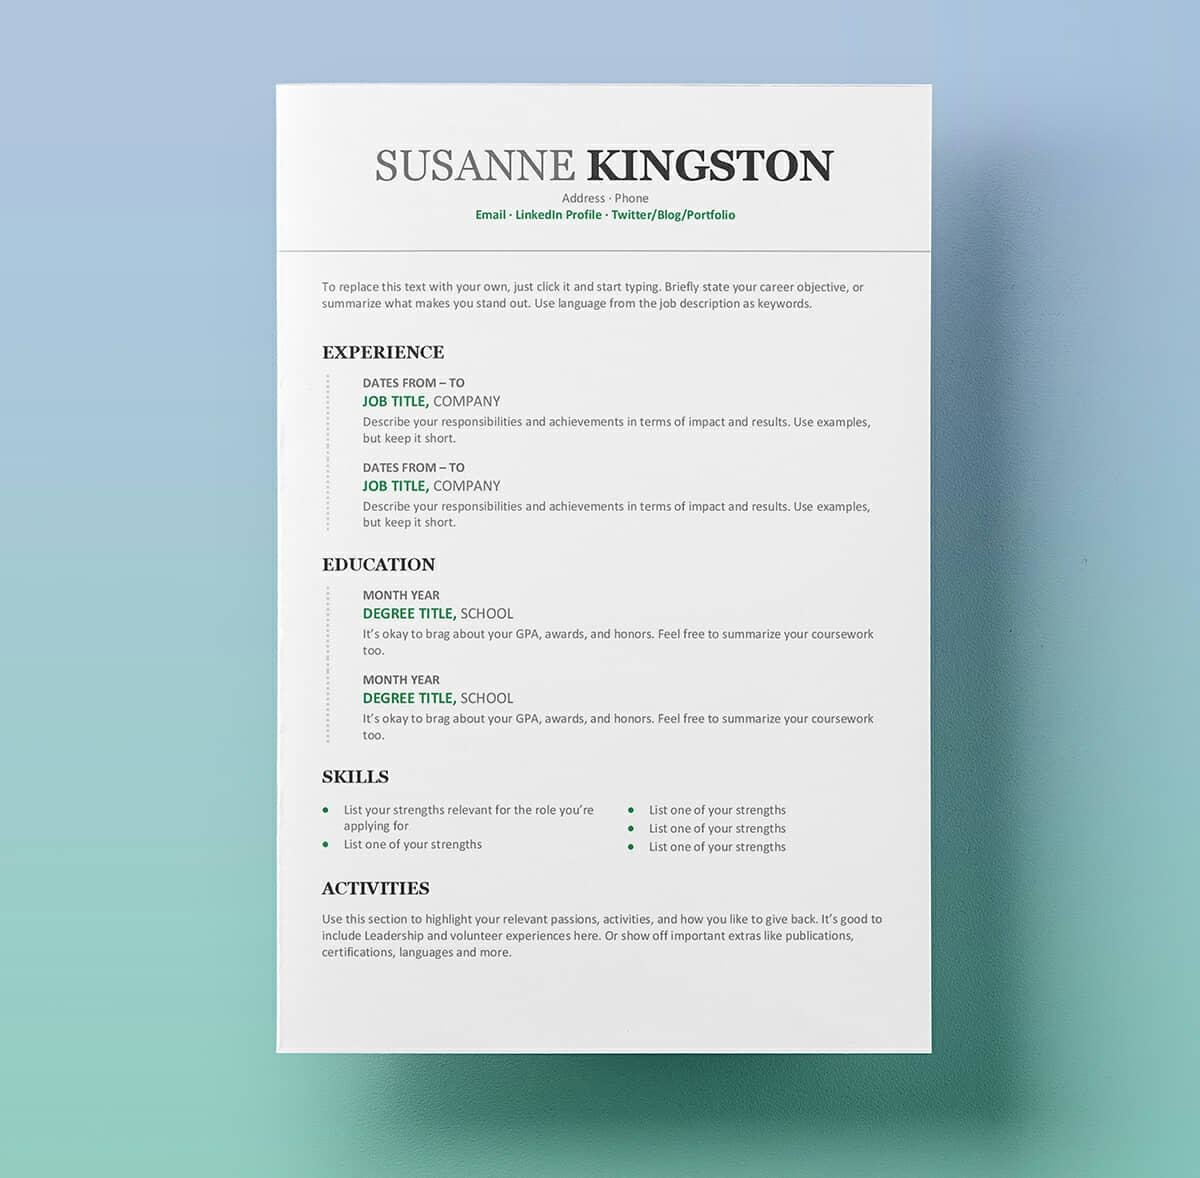 Free Professional Cv Format In Ms Word – Free Downloadable Within Free Downloadable Resume Templates For Word